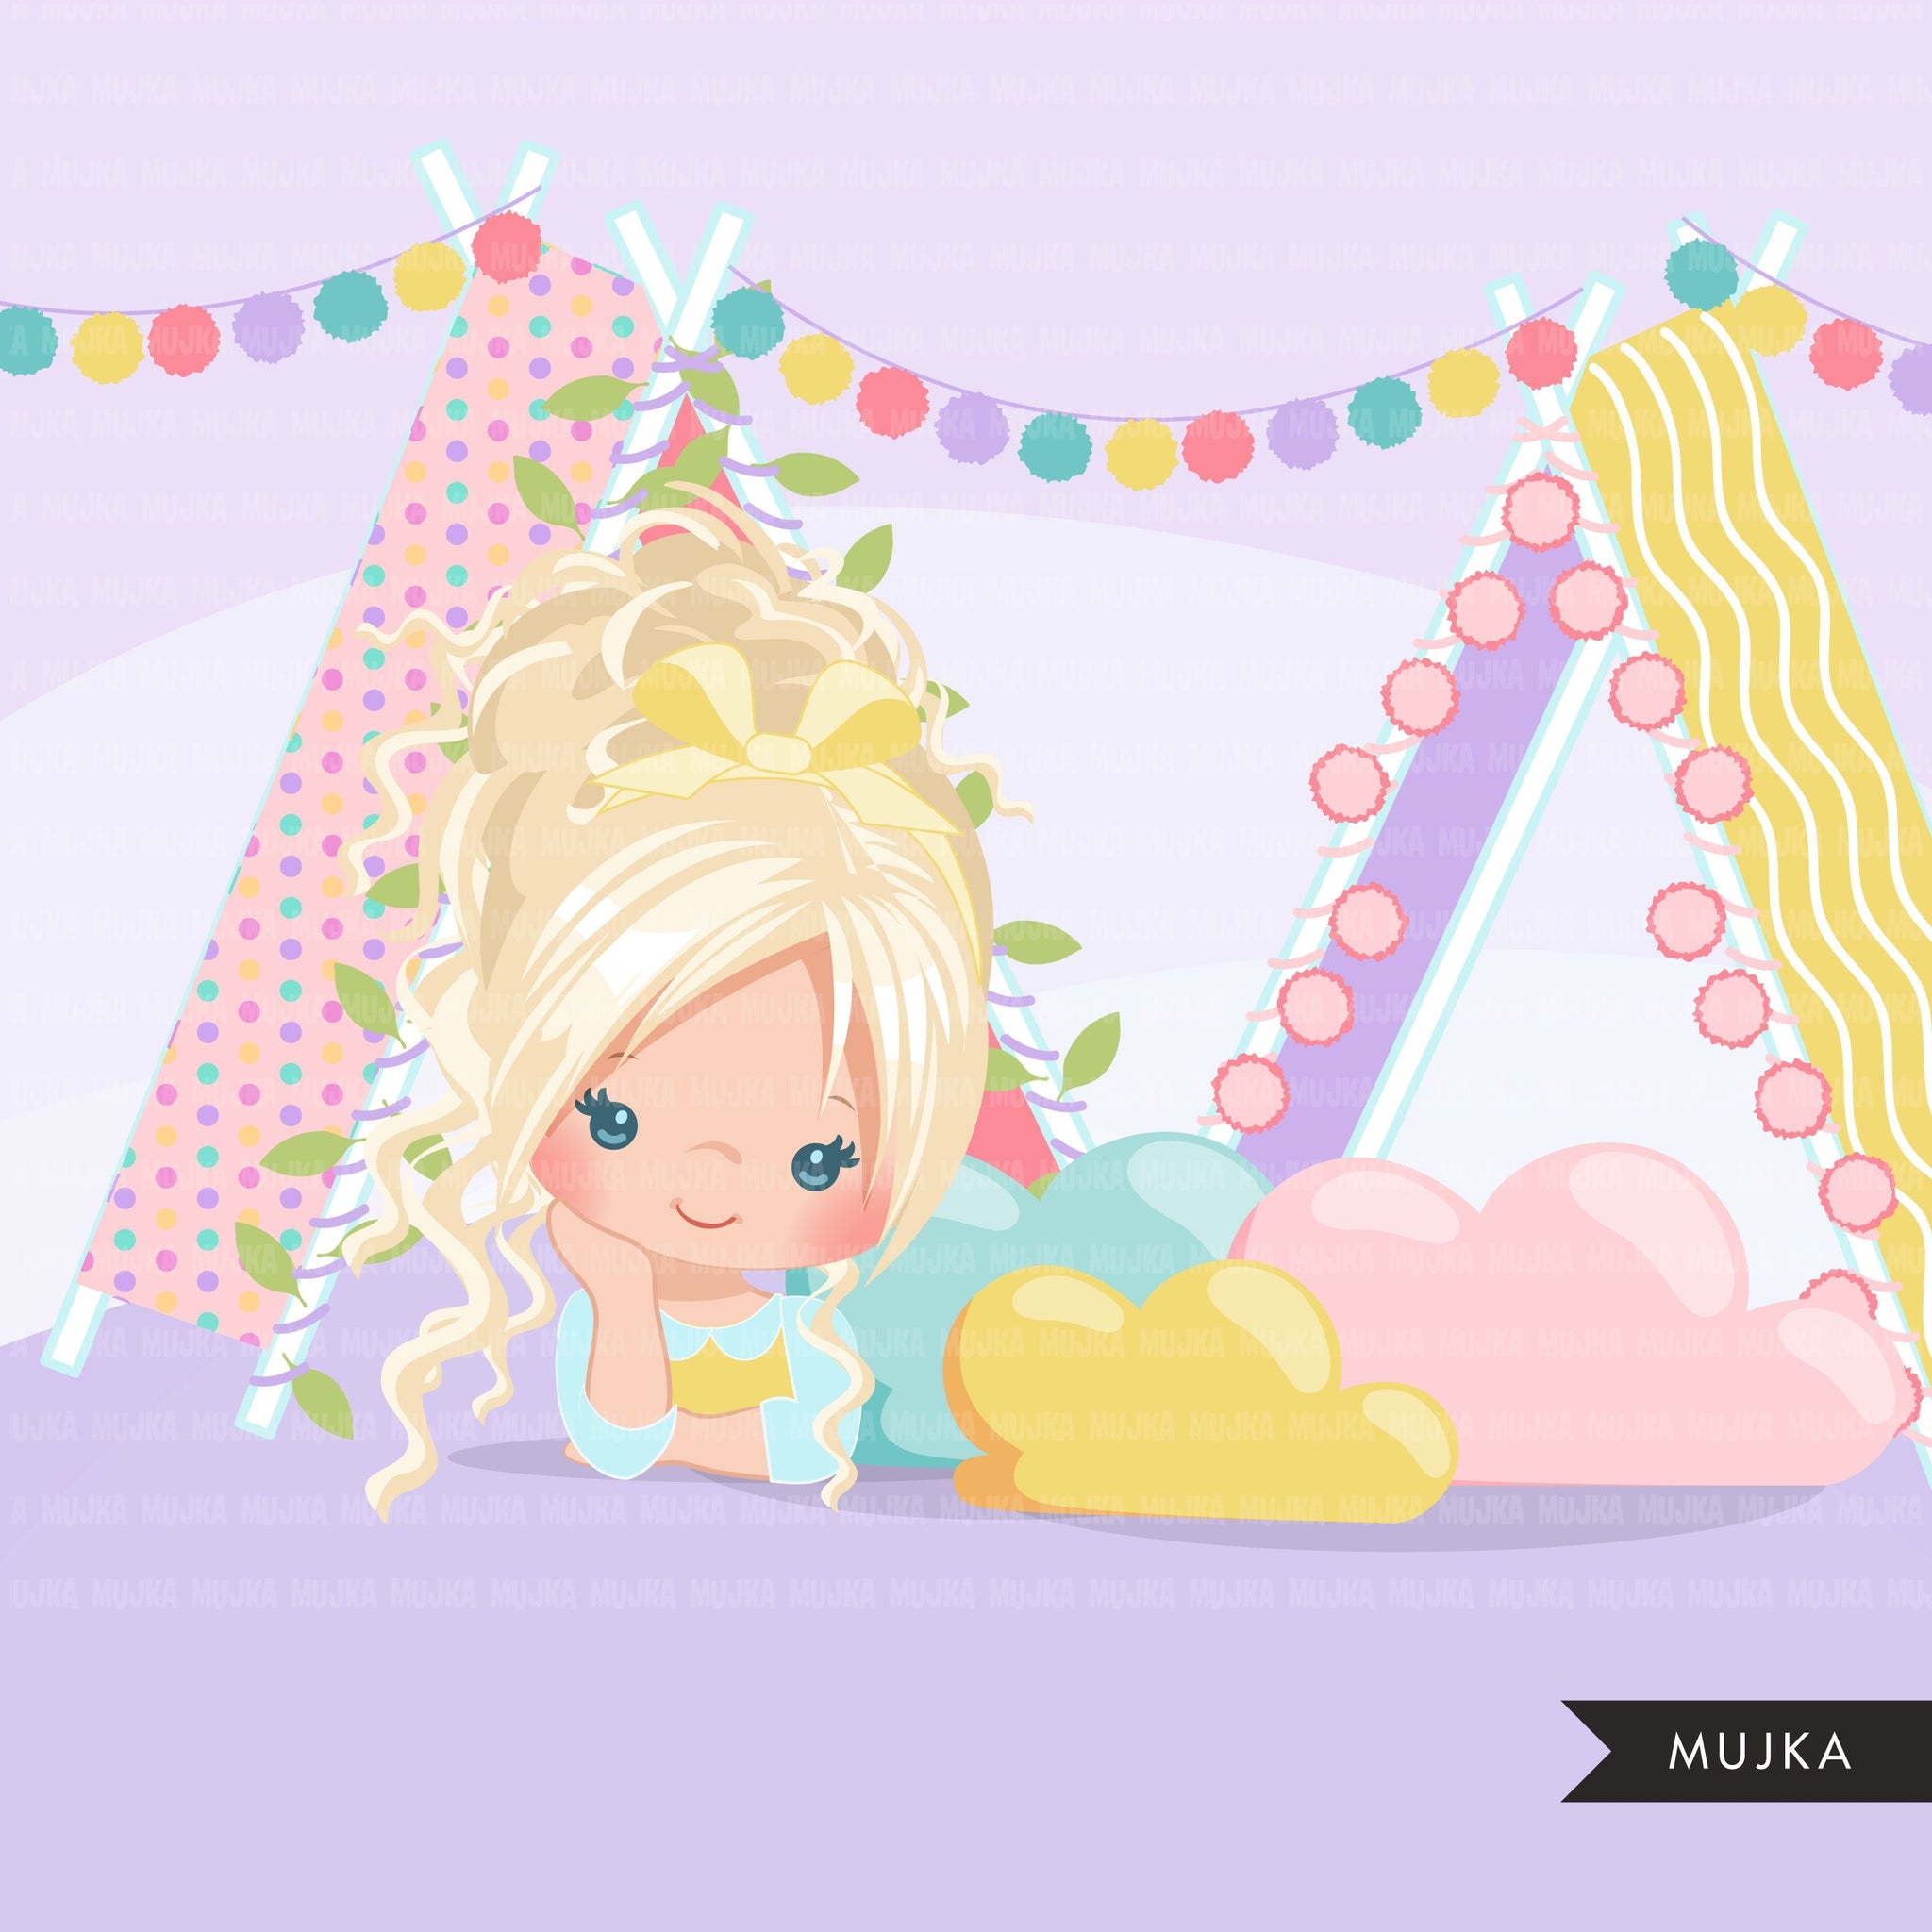 Slumber party clipart, sleepover tents for girl